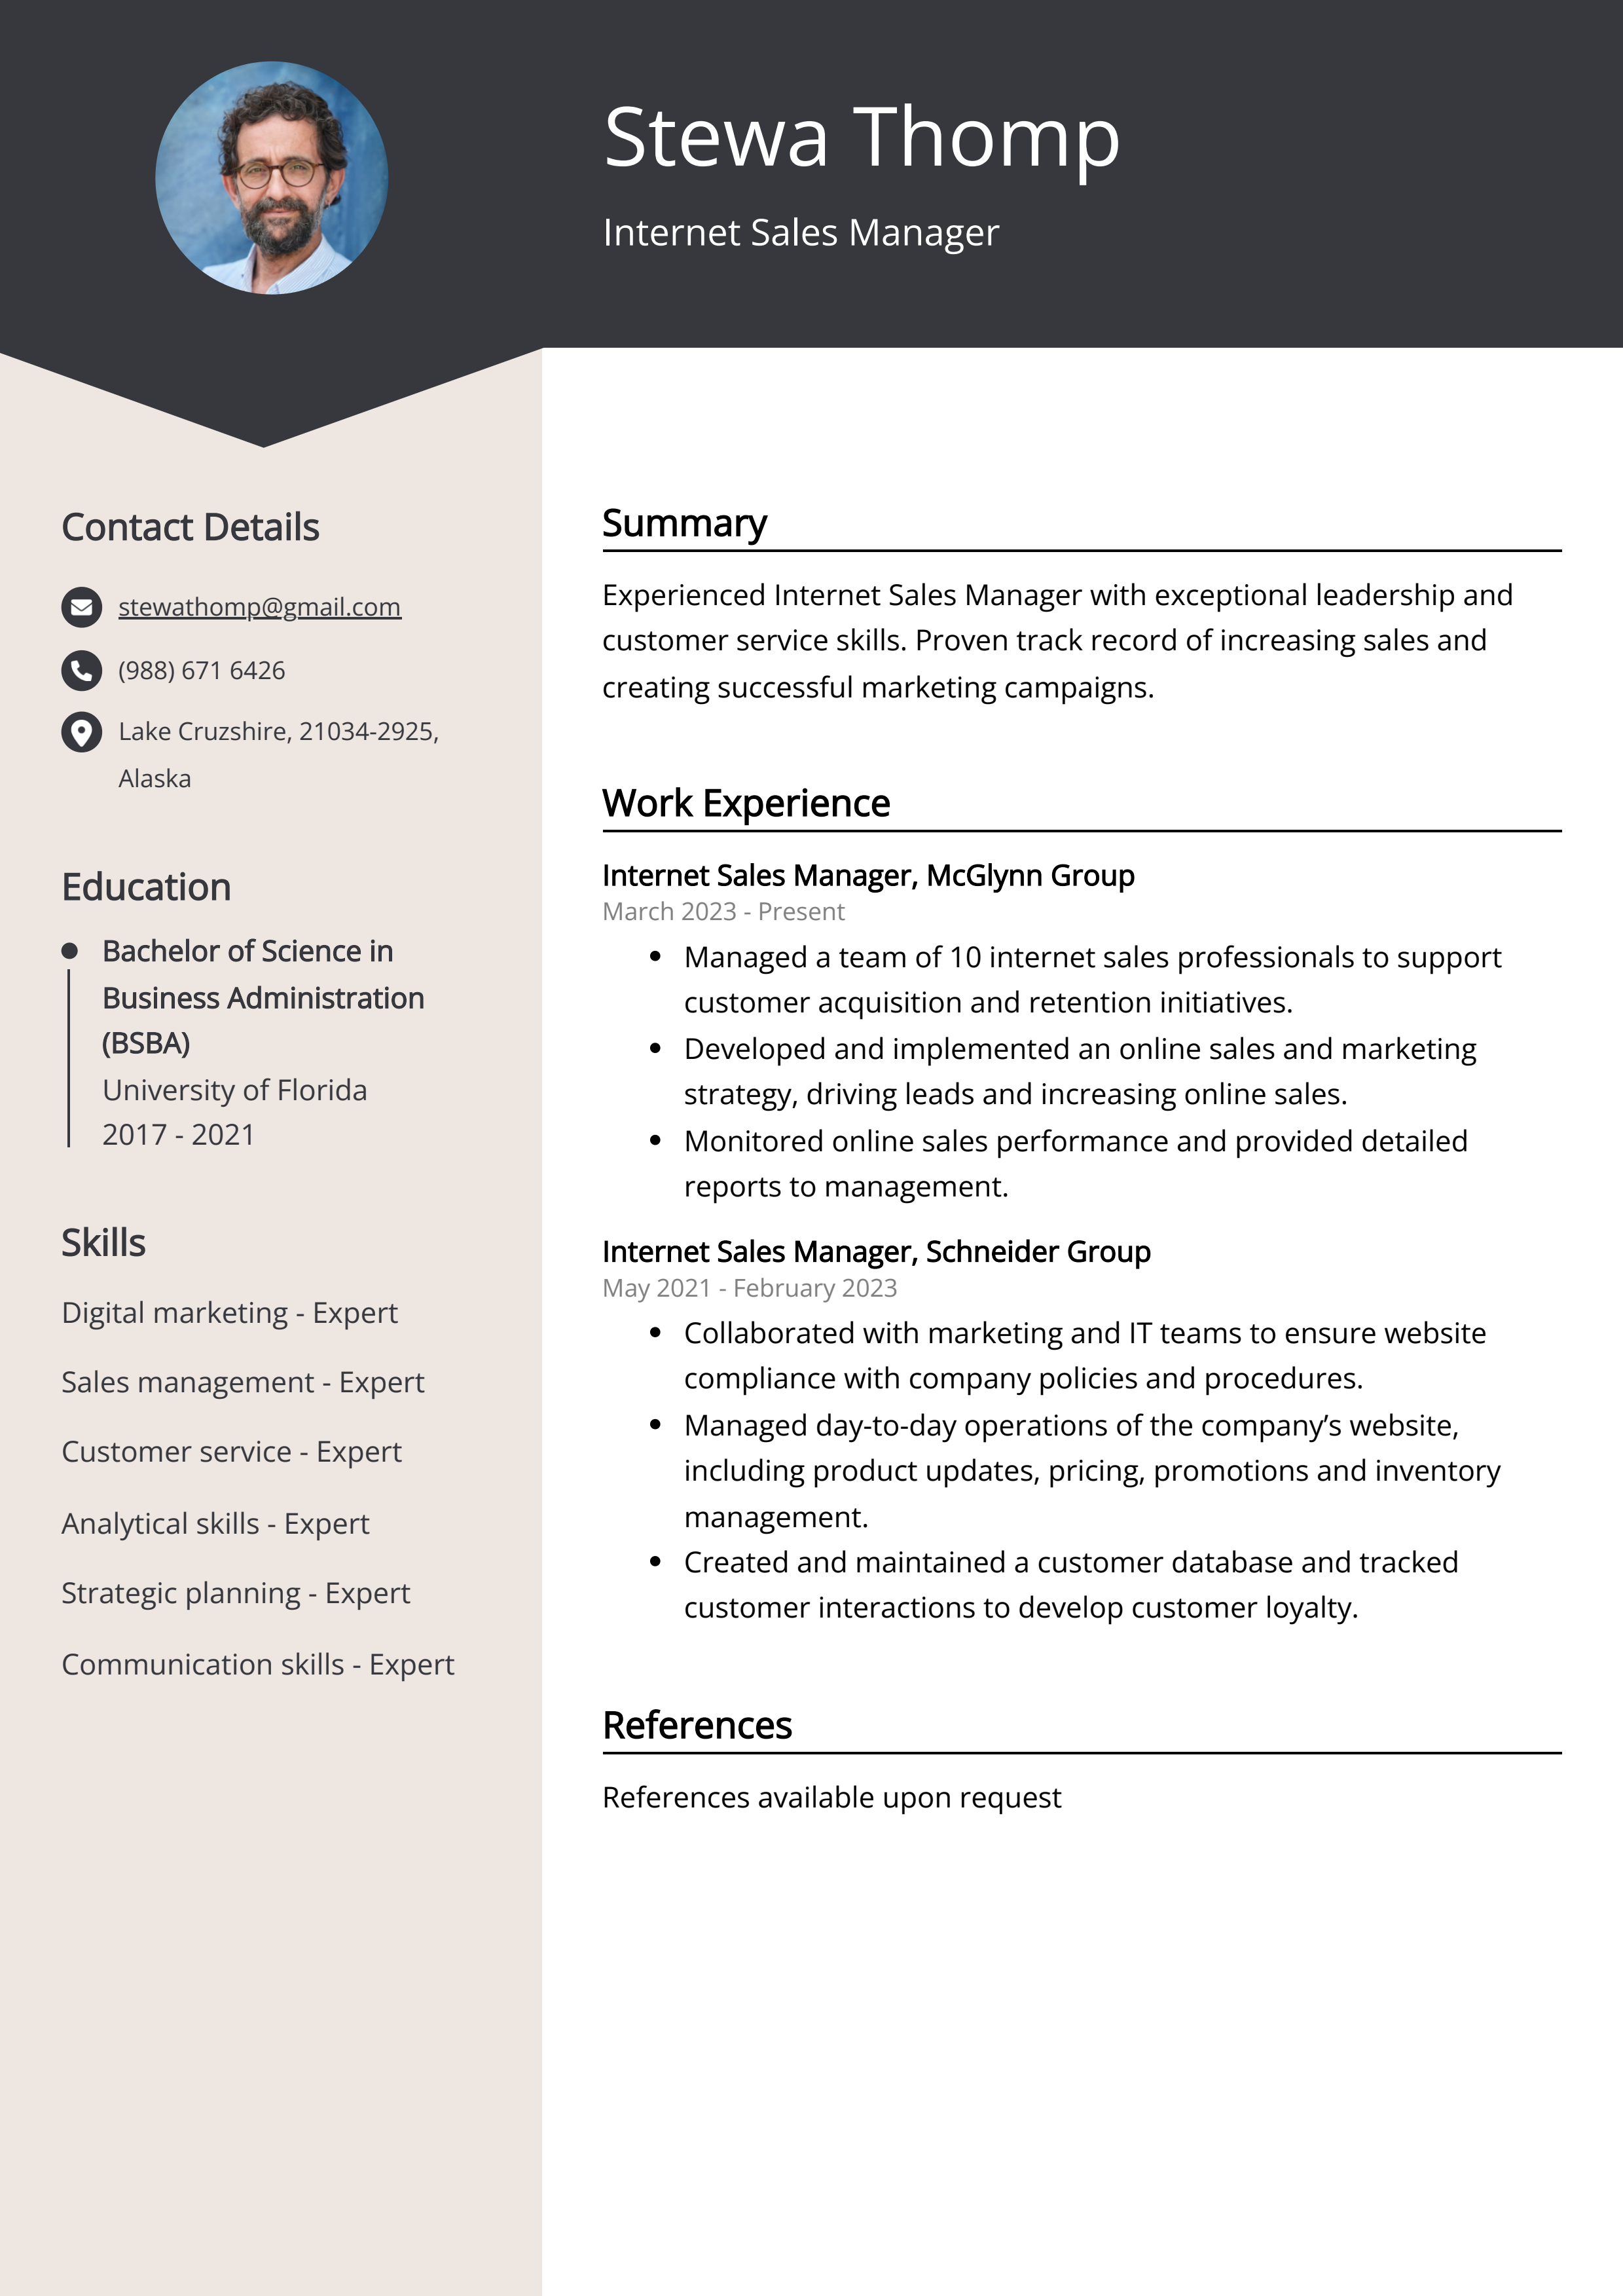 Internet Sales Manager CV Example